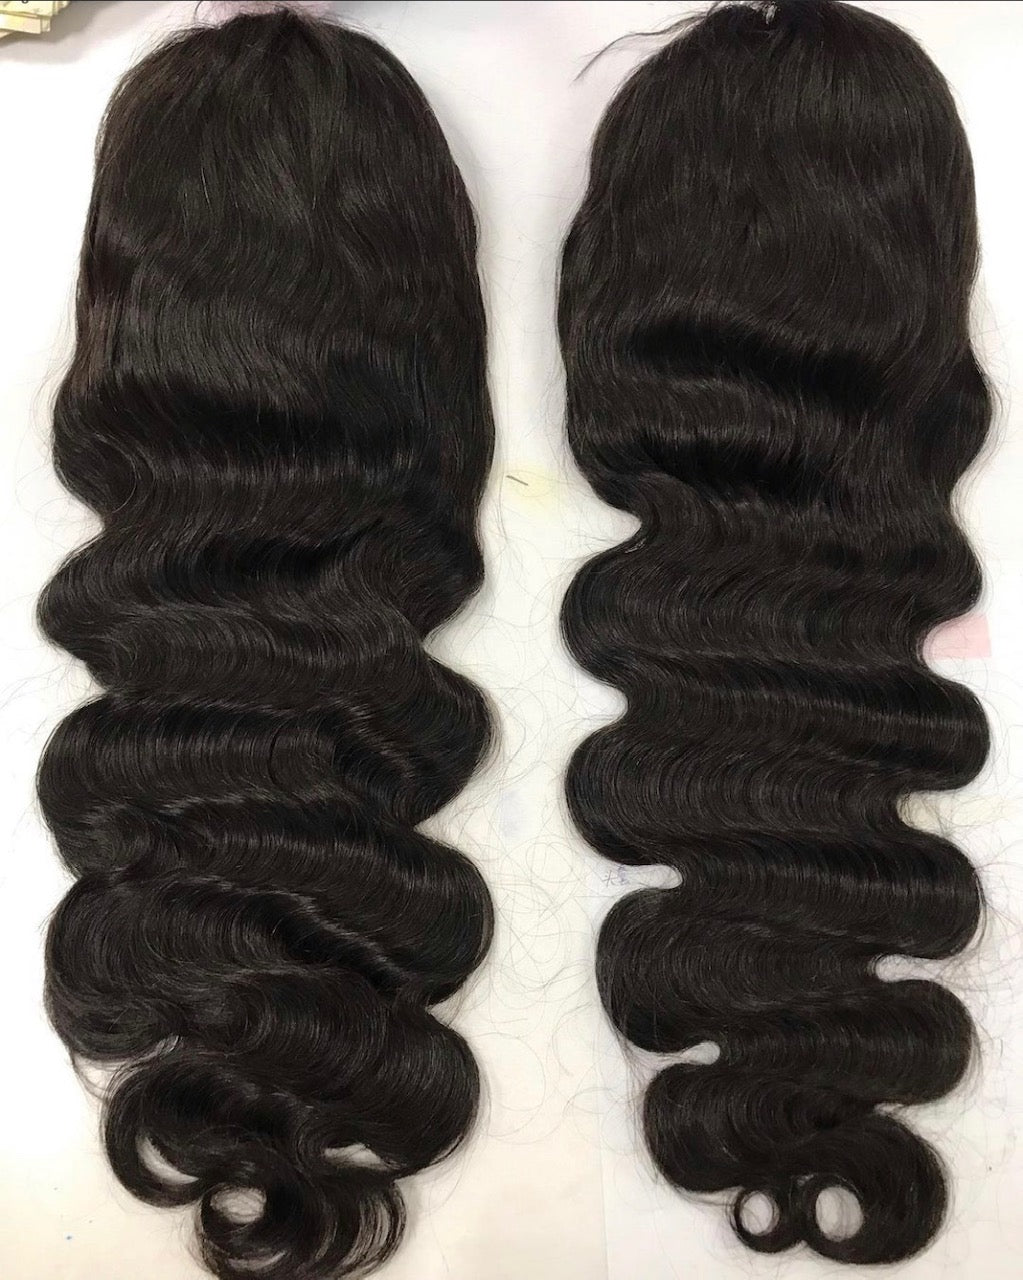 BODY WAVE LACE FRONTAL WIG